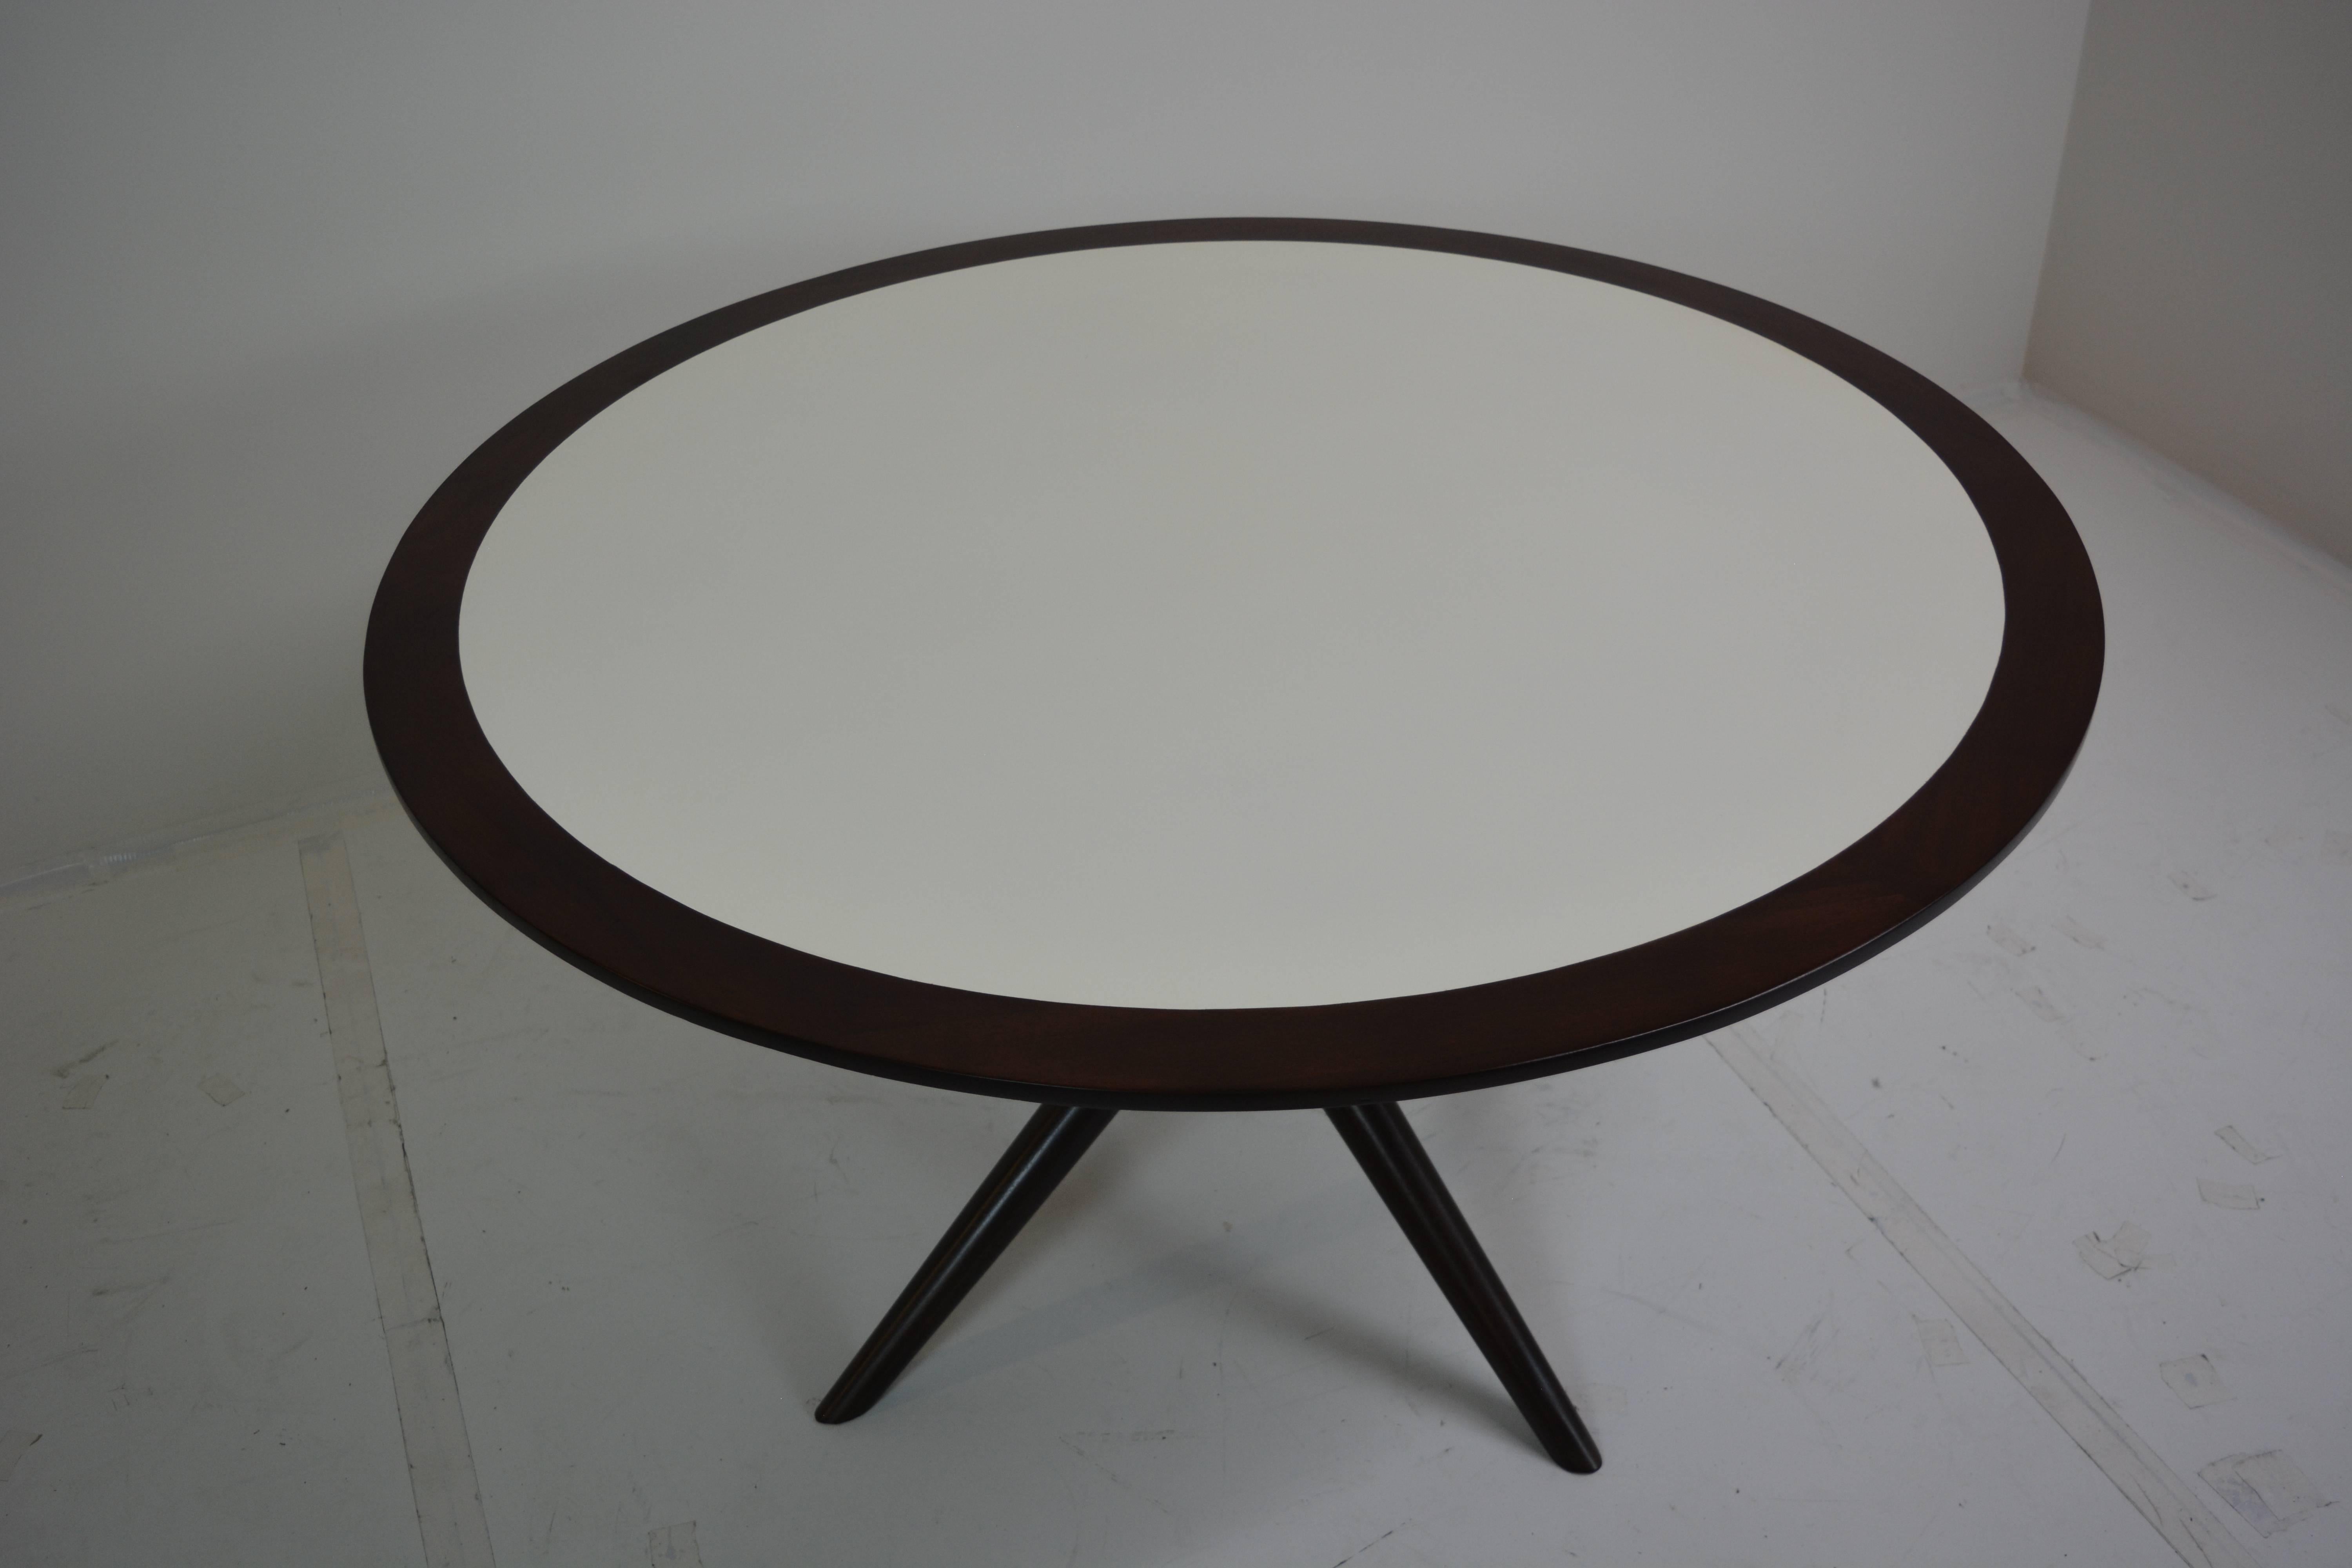 Monteverdi Young Jax table. Excellent condition solid walnut table professionally refinished in a dark walnut hue and a white lacquered top, circa 1960s. Measures: 48